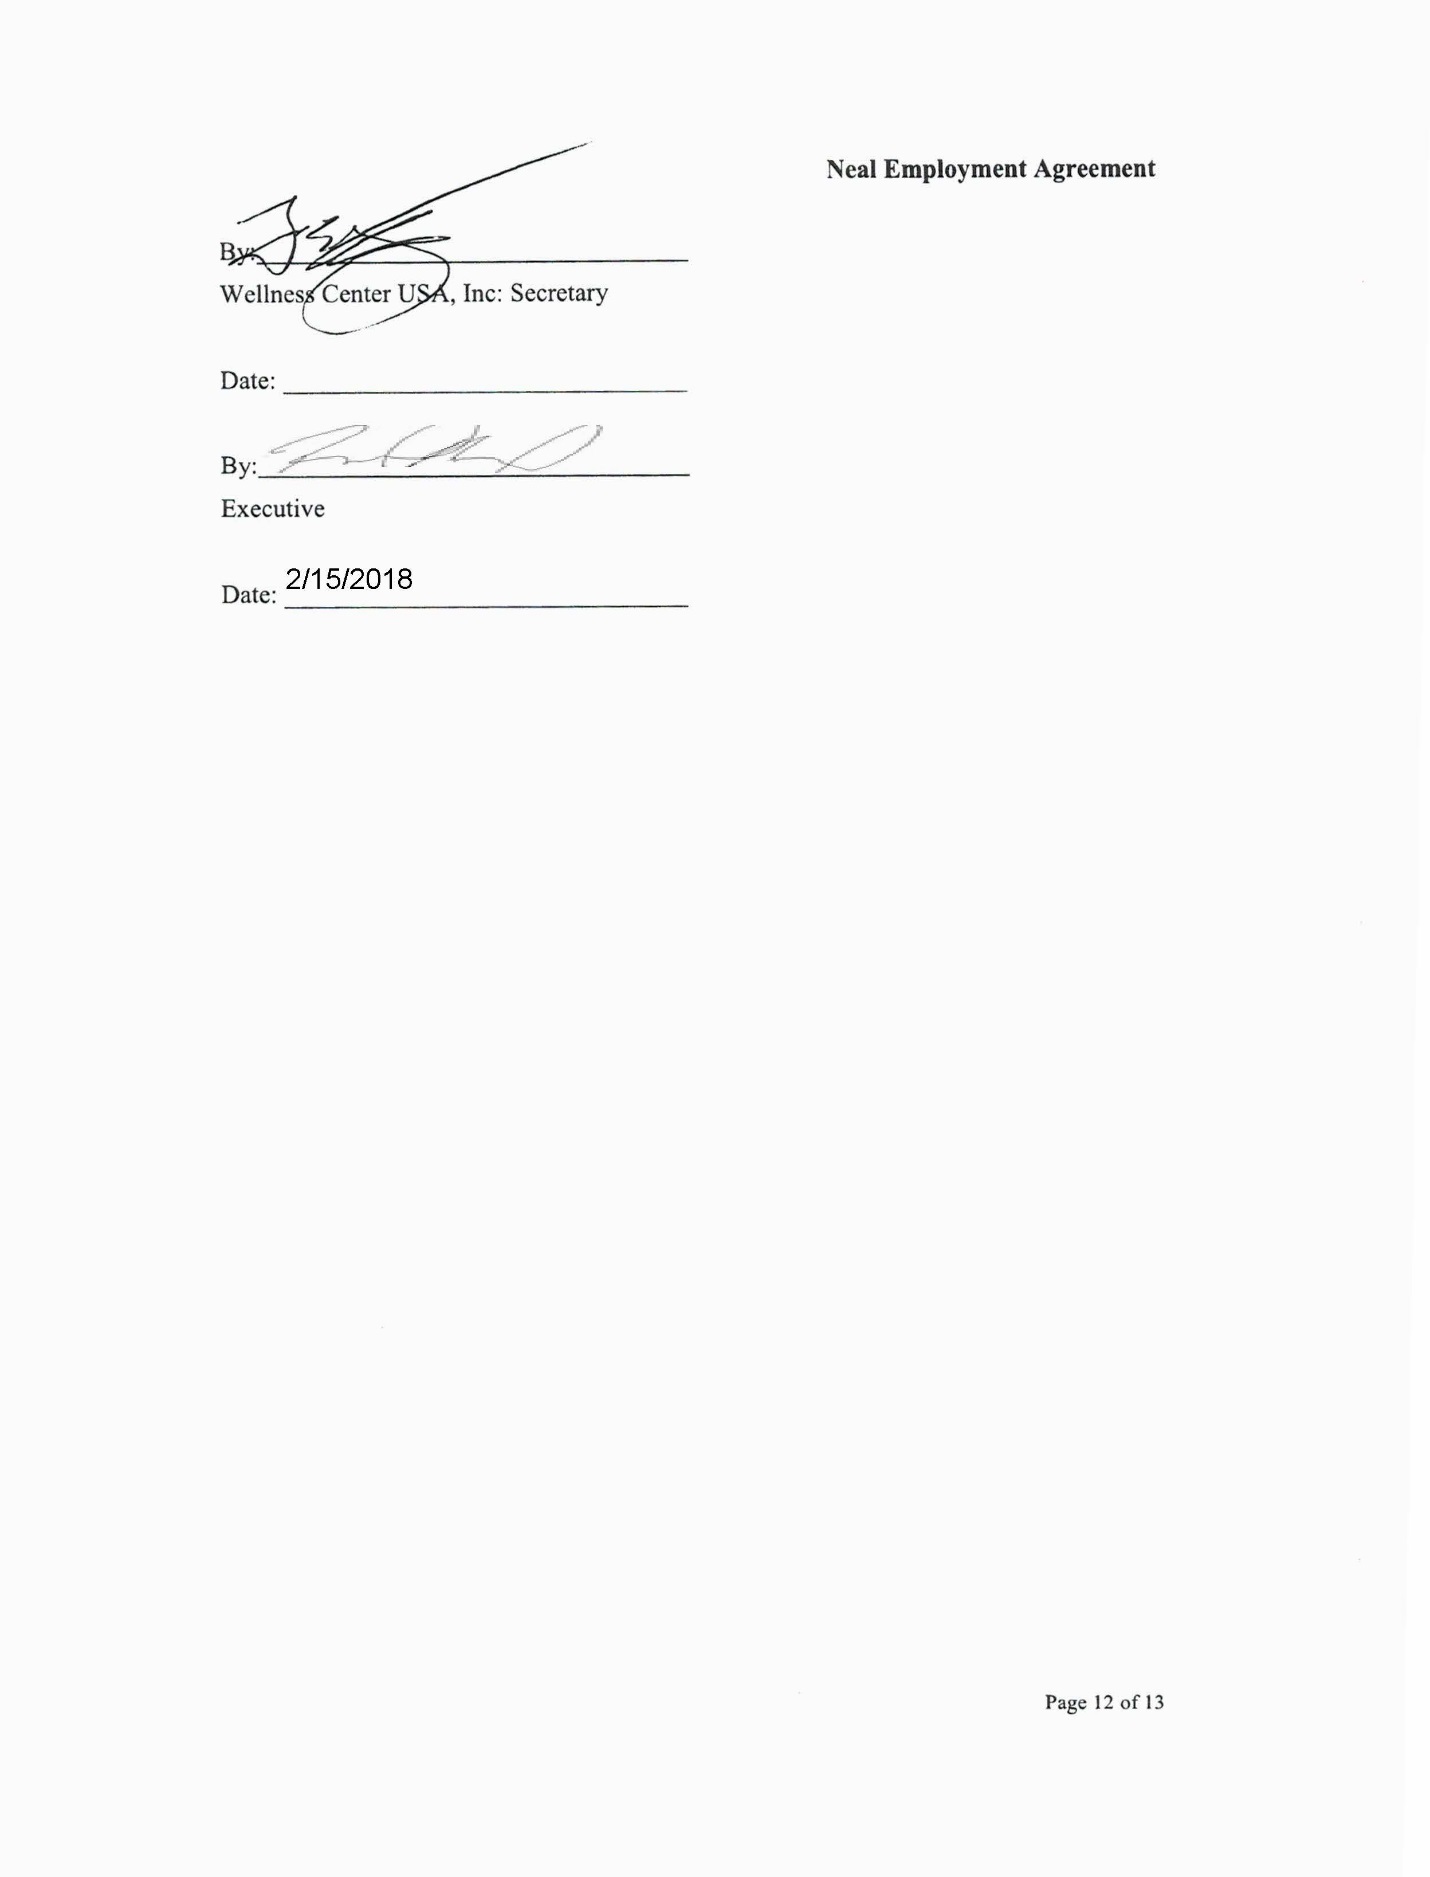 Rich Neal Employ Agree_final_signed (1) (1)_Page_12.jpg